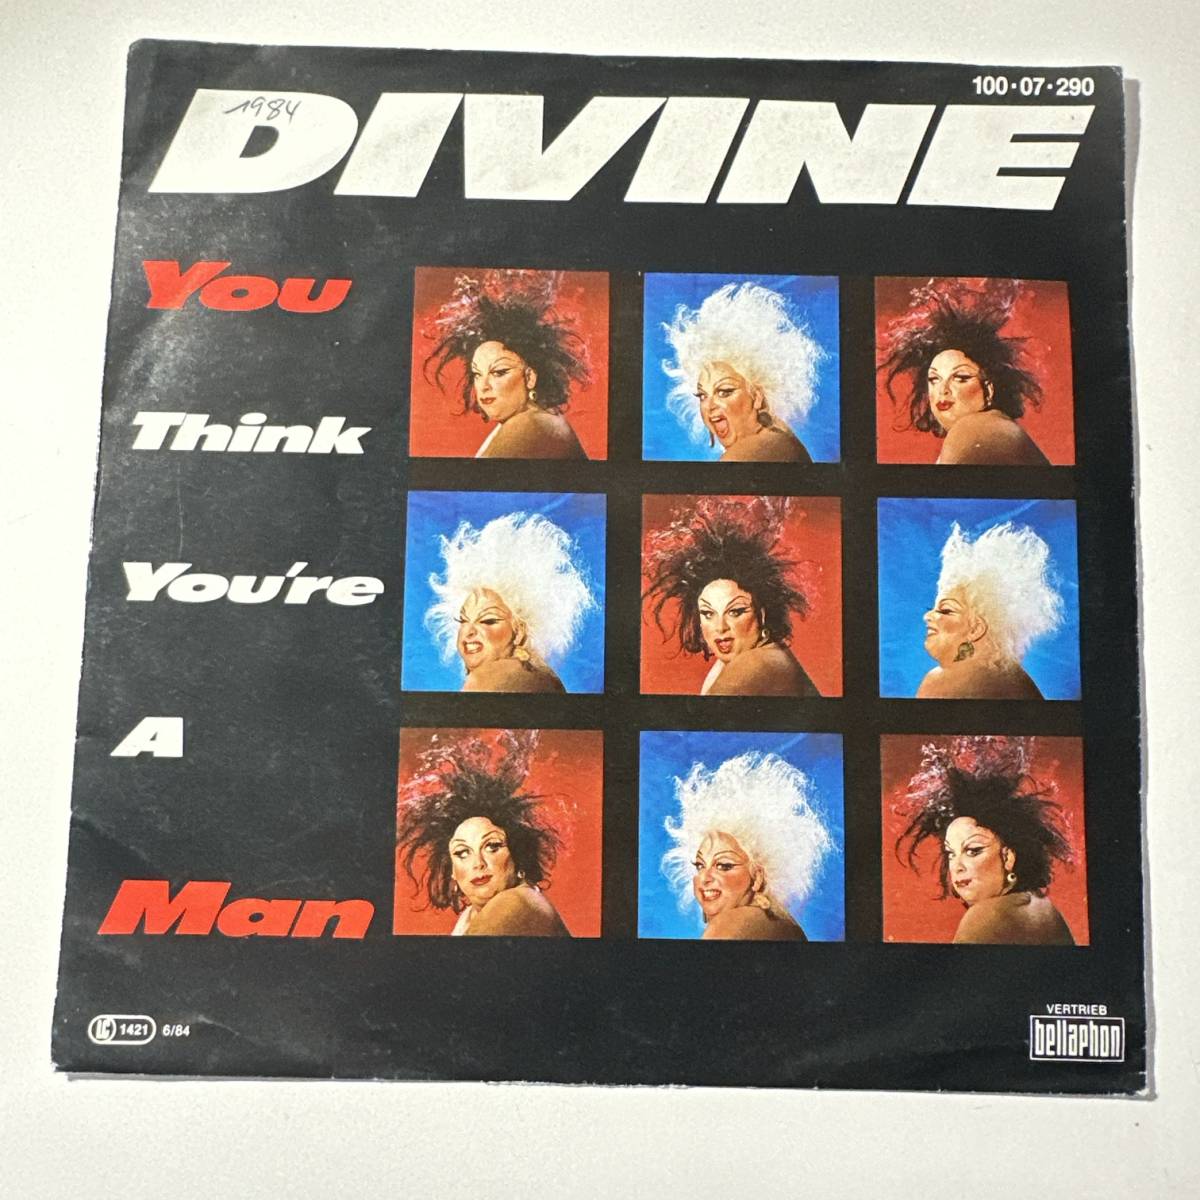 Divine - You Think You're A Man ☆ドイツOrig 7″☆ハイエナジービッグヒット!! DISCO!!_画像1